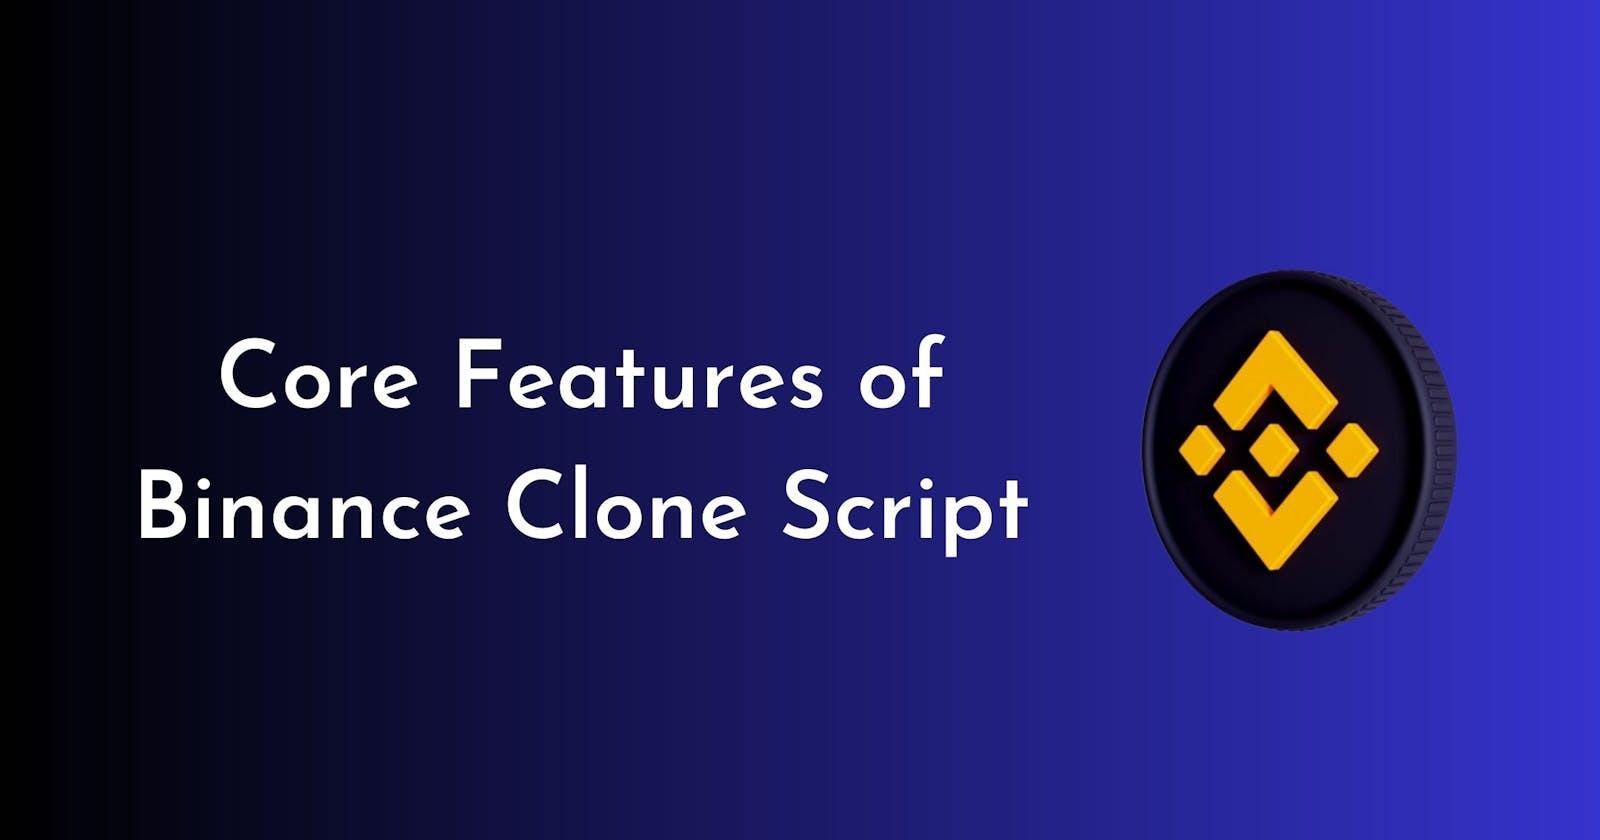 Look into the Core Features of Binance Clone Script